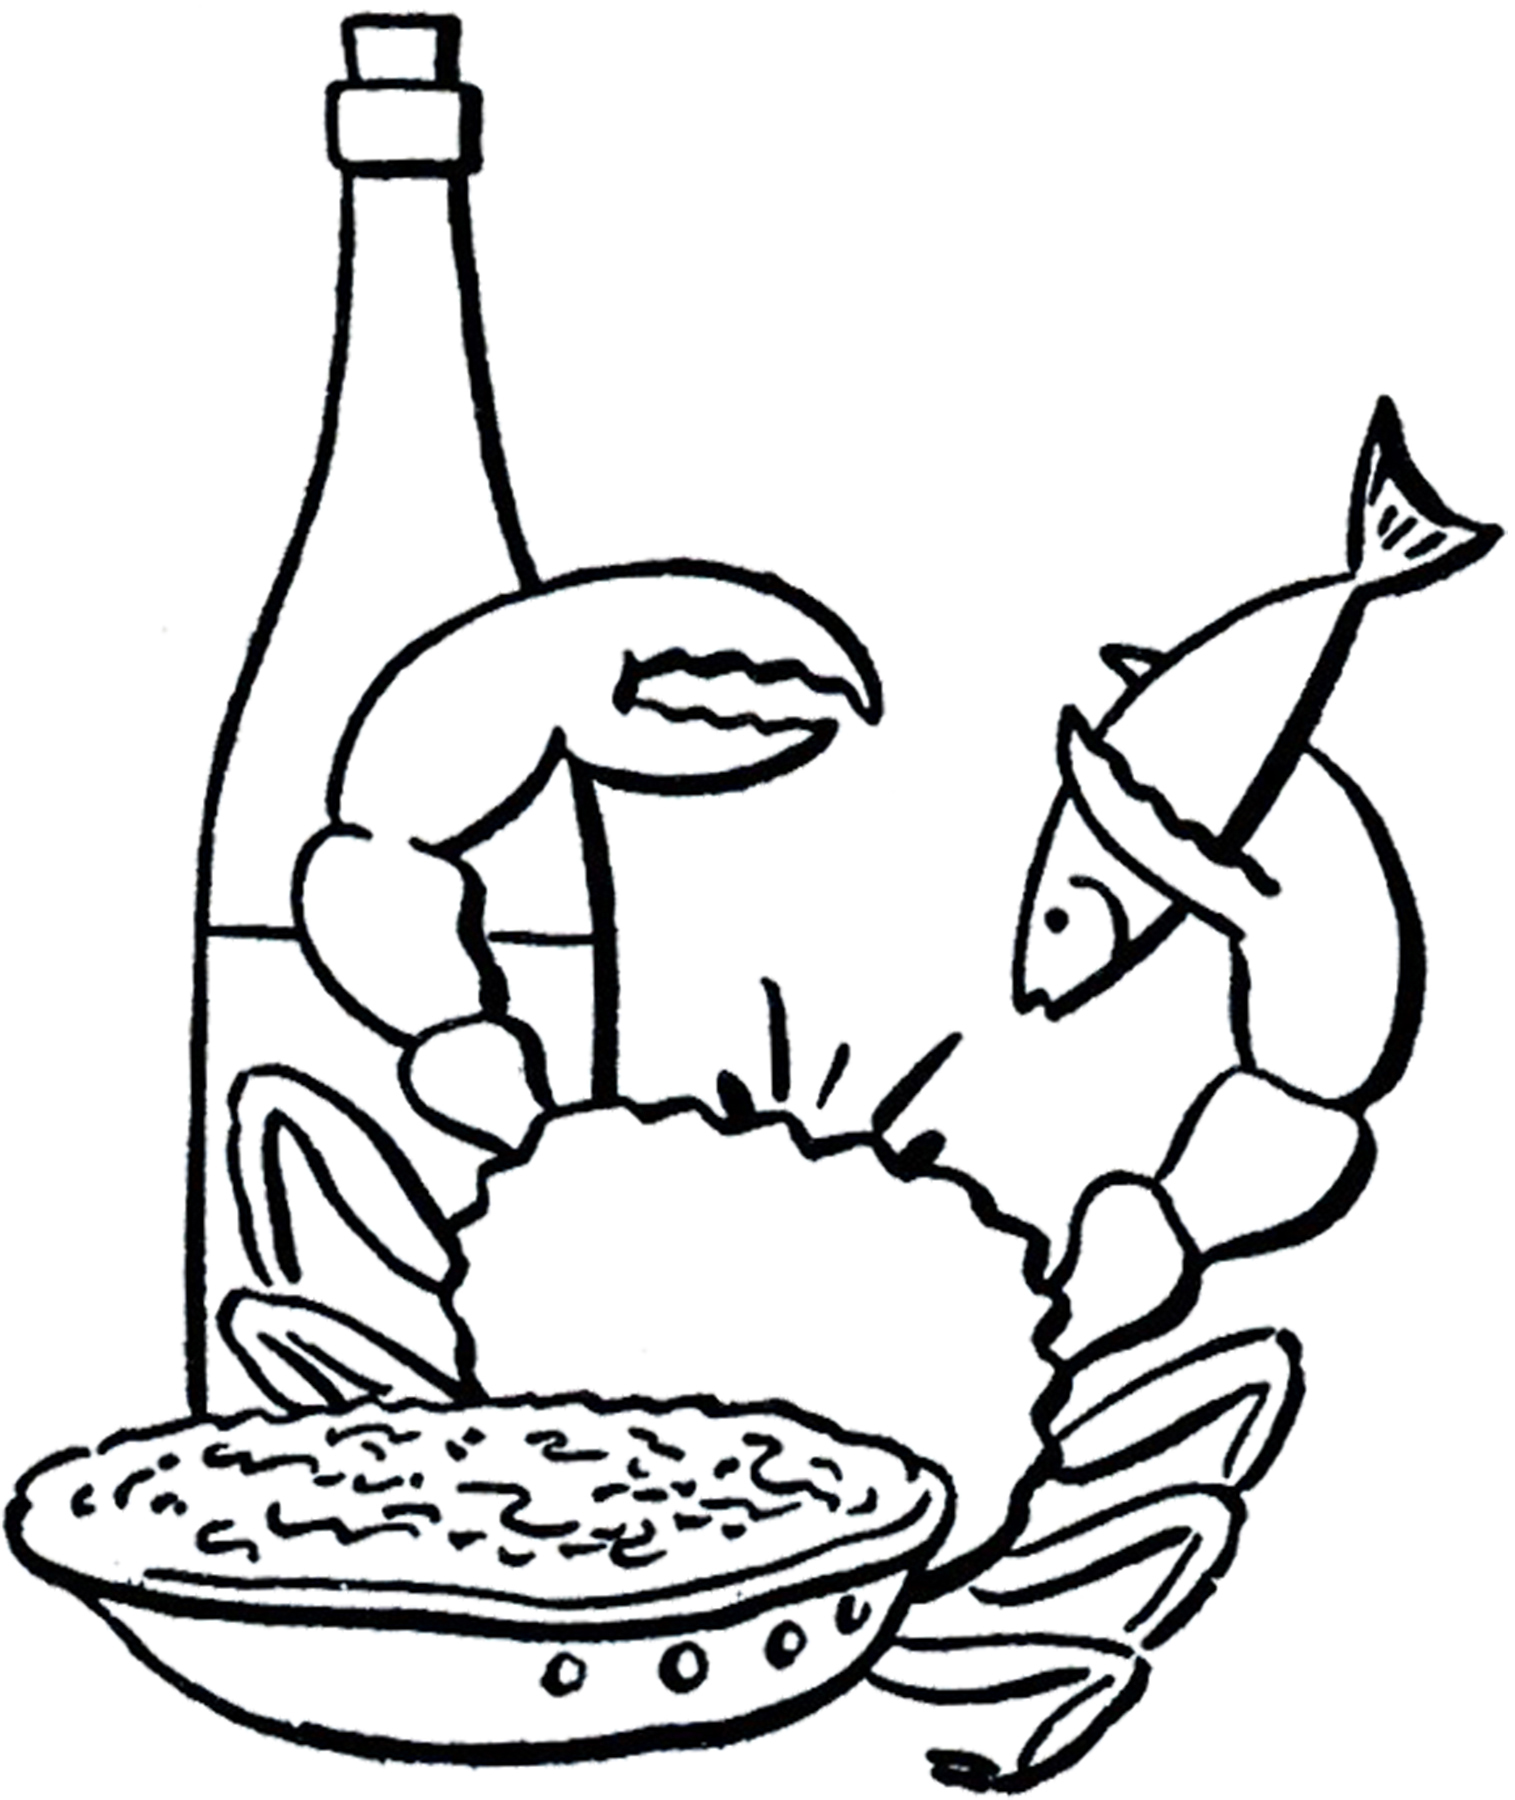 Free seafood clipart clipart clip art pictures graphics image